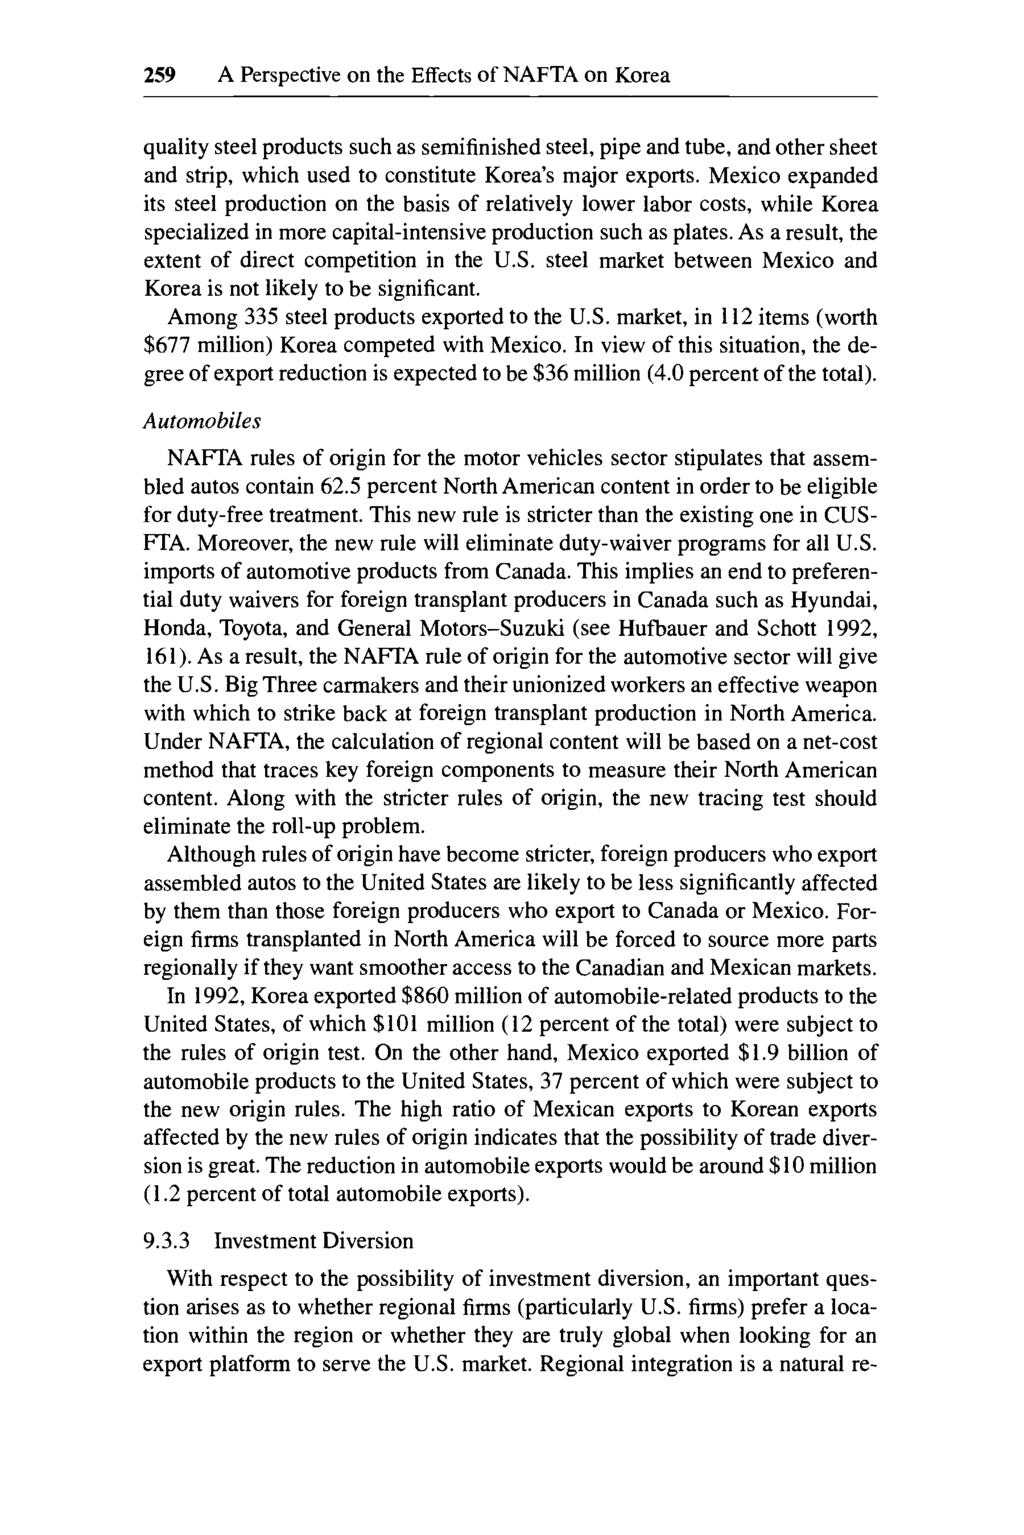 259 A Perspective on the Effects of NAFTA on Korea quality steel products such as semifinished steel, pipe and tube, and other sheet and strip, which used to constitute Korea s major exports.